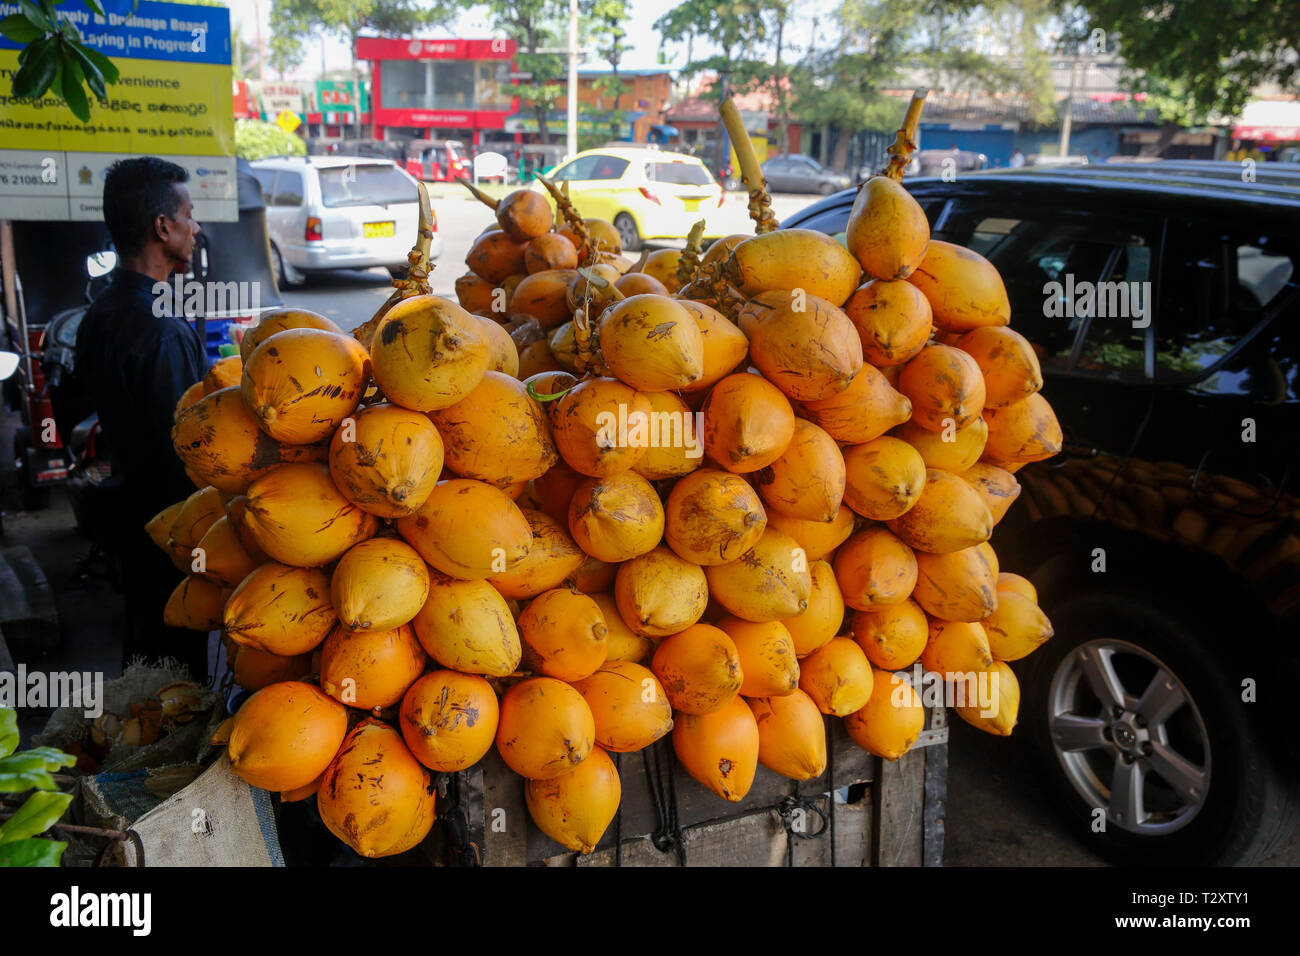 Red King coconuts for sale on the street in Colombo, Sri Lanka Stock Photo